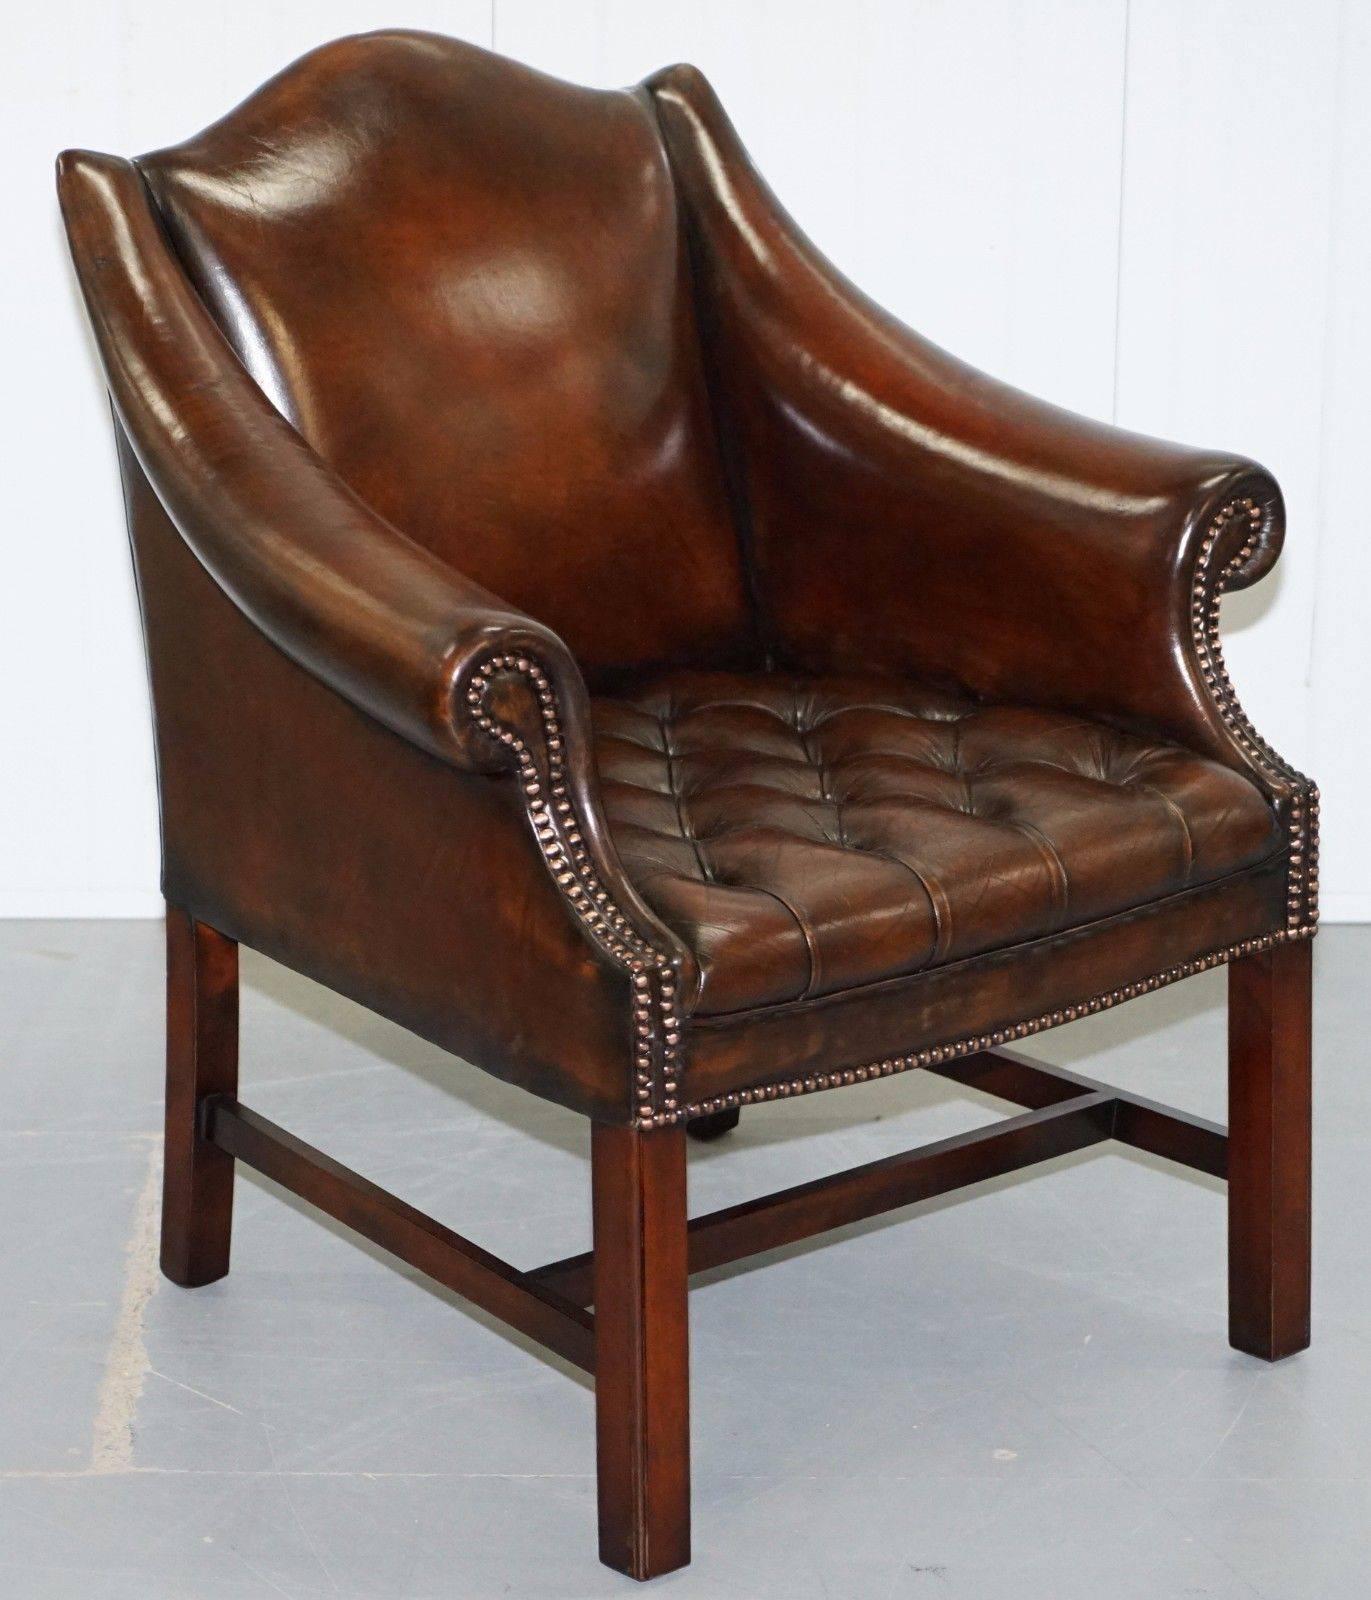 We are delighted to offer for sale this stunning pair of fully restored vintage Chesterfield club armchairs

A truly remarkable find, the leather is 100% English premium cattle hide, it has been stripped back to the plain hide then hand dyed six